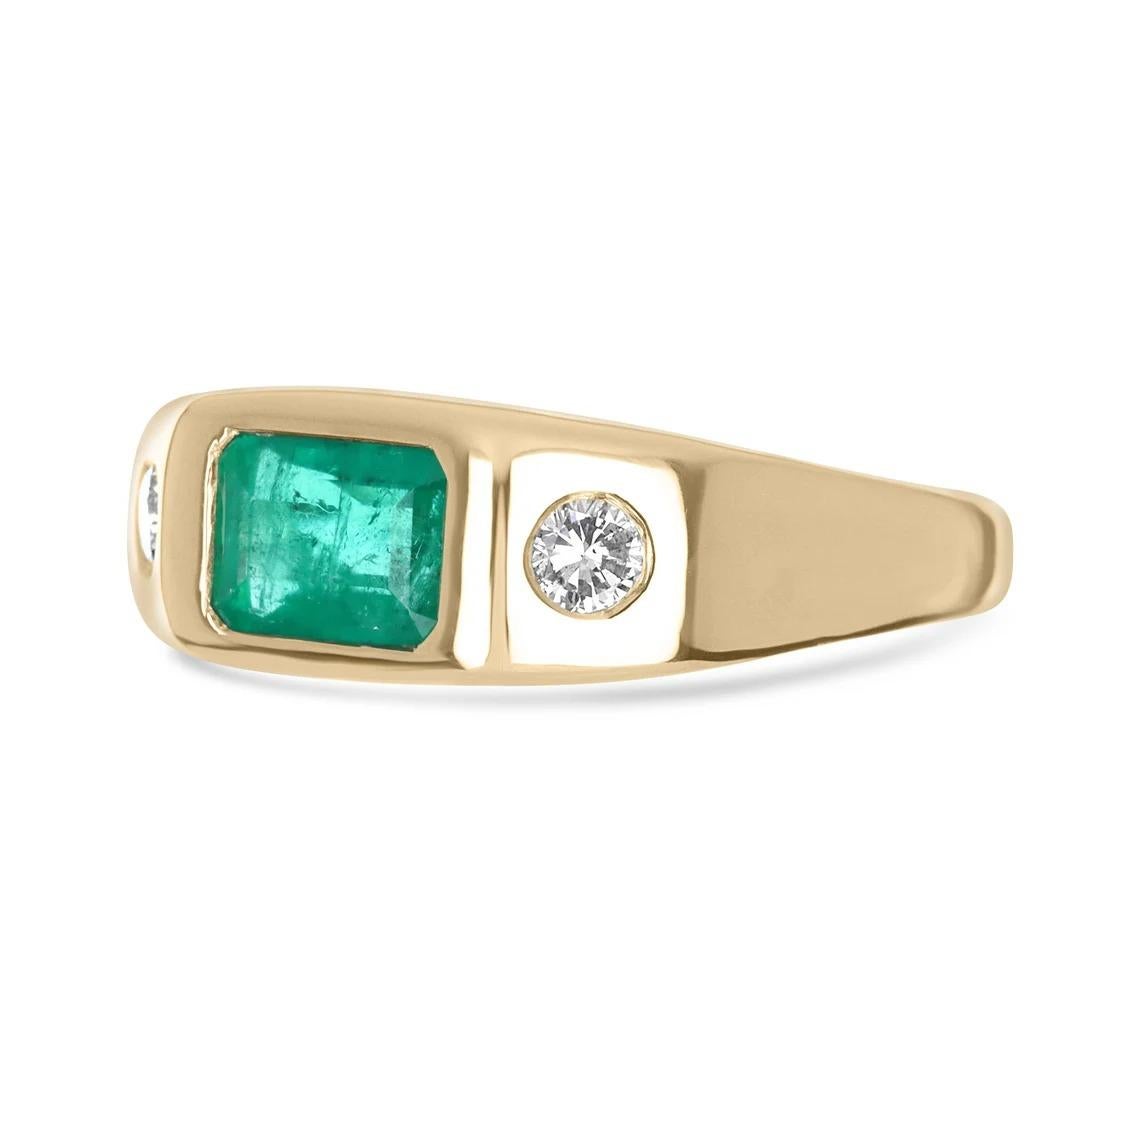 A Colombian emerald and diamond gypsy-styled ring. Dexterously handcrafted in gleaming 14K yellow gold, this ring features a 1.19-carat natural Colombian emerald, emerald cut from the famous Chivor mines. Set in a secure bezel setting for extra